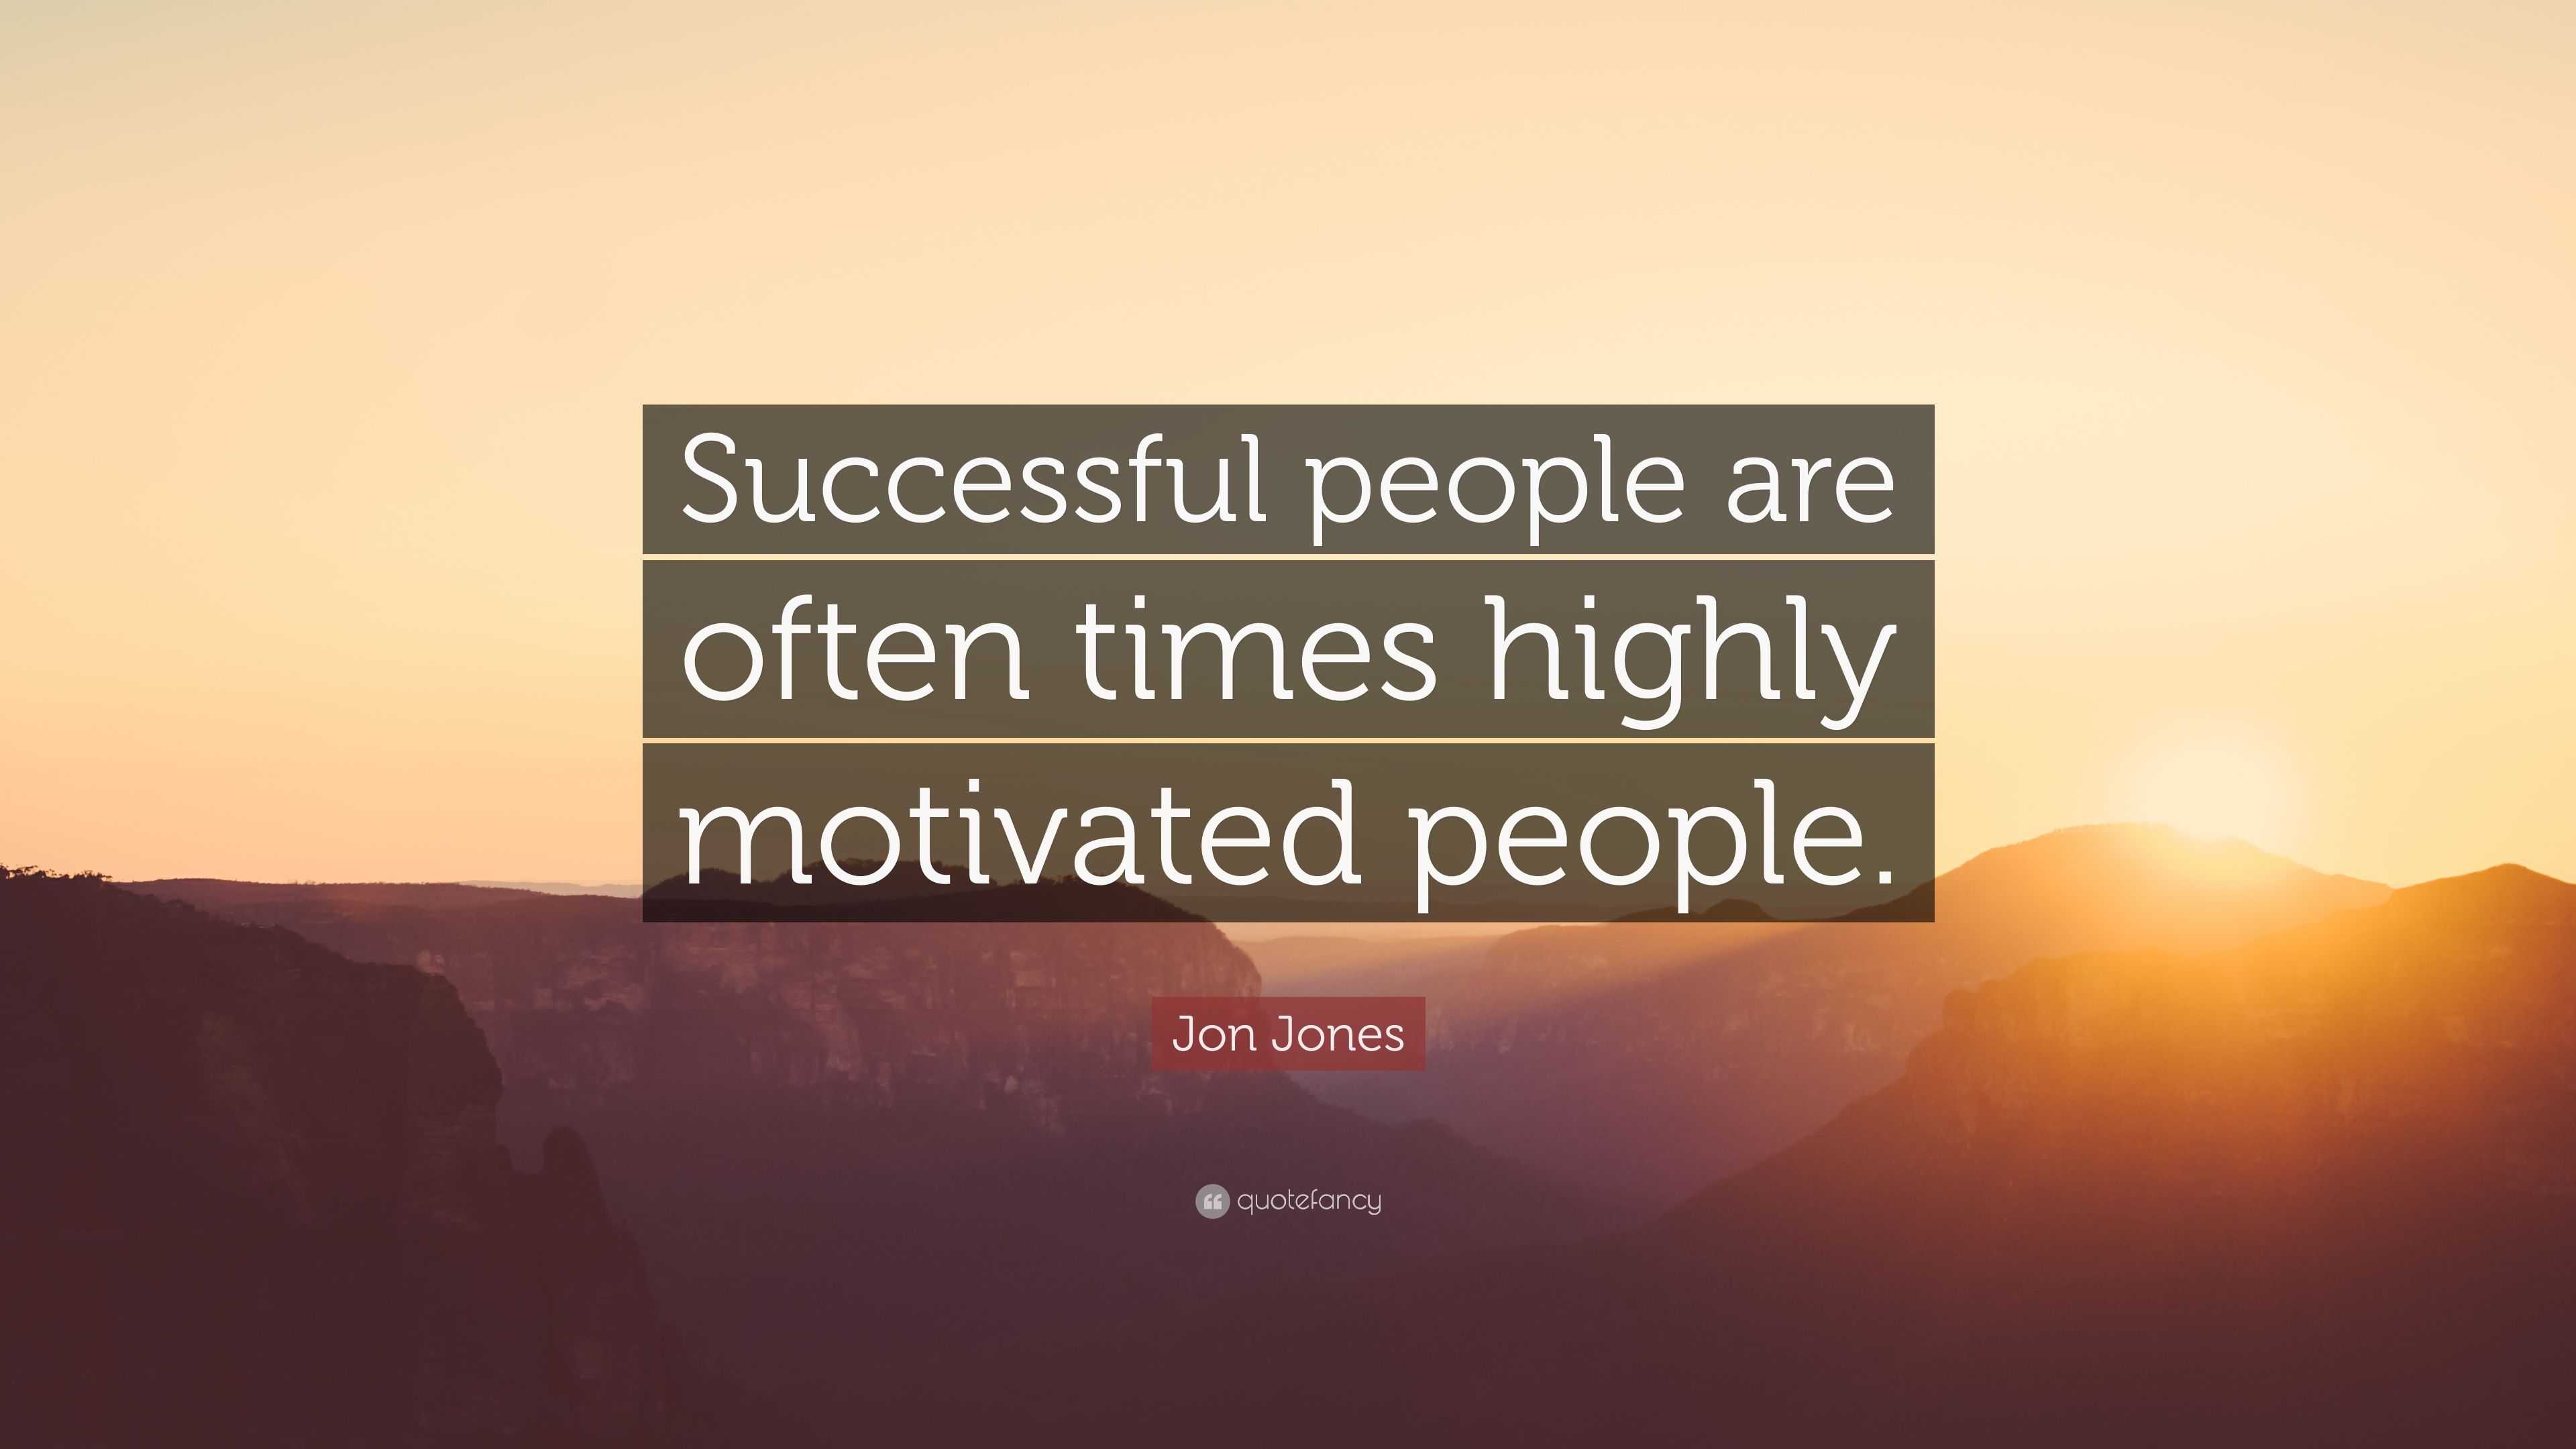 Jon Jones Quote: “Successful people are often times highly motivated ...